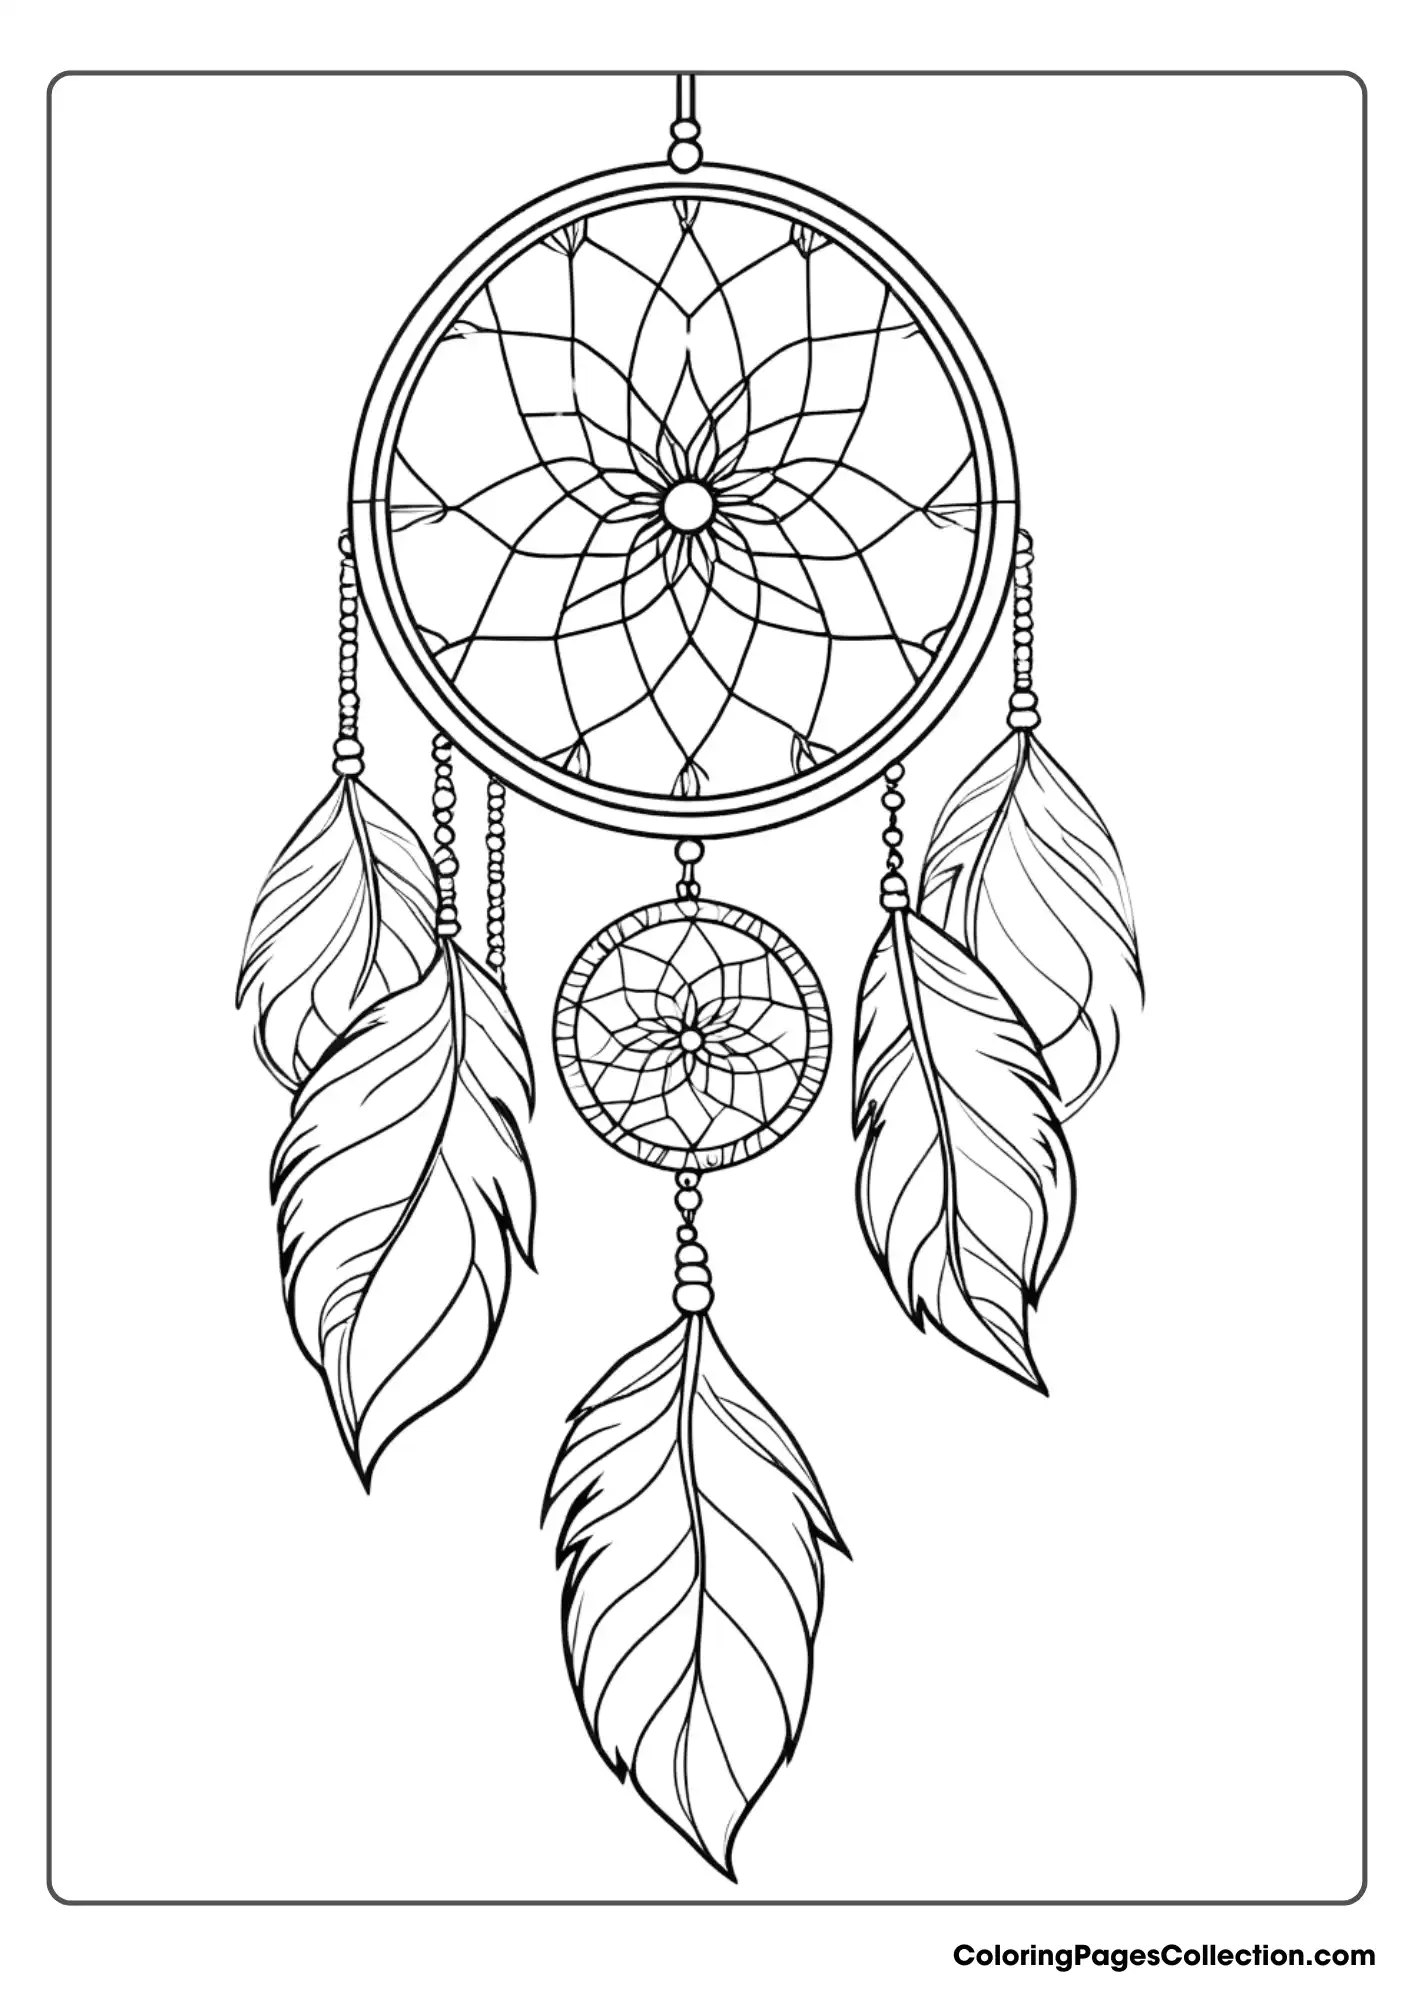 Coloring pages for teens, Dreamcatcher For Teen to Color